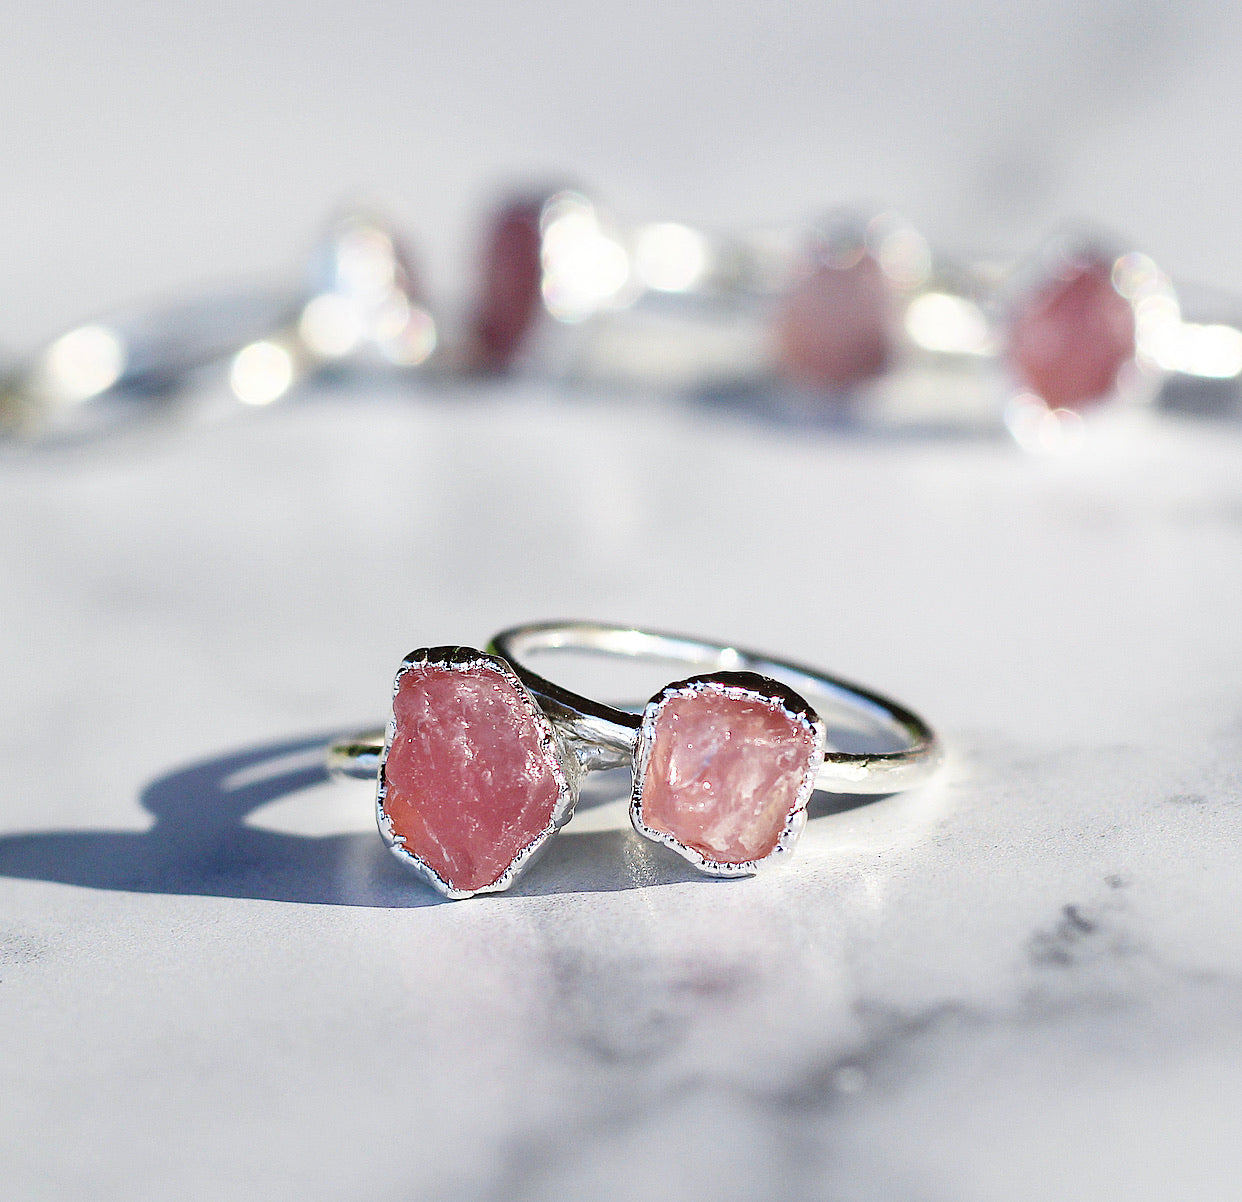 Raw Rose Quartz Ring in Sterling Silver, love stone ring, raw gem ring, rose quartz nugget, uncut rose quartz, birthstone ring, Taurus birthstone, rose quartz ring, sterling silver raw, buddha blossom, blossom jewels